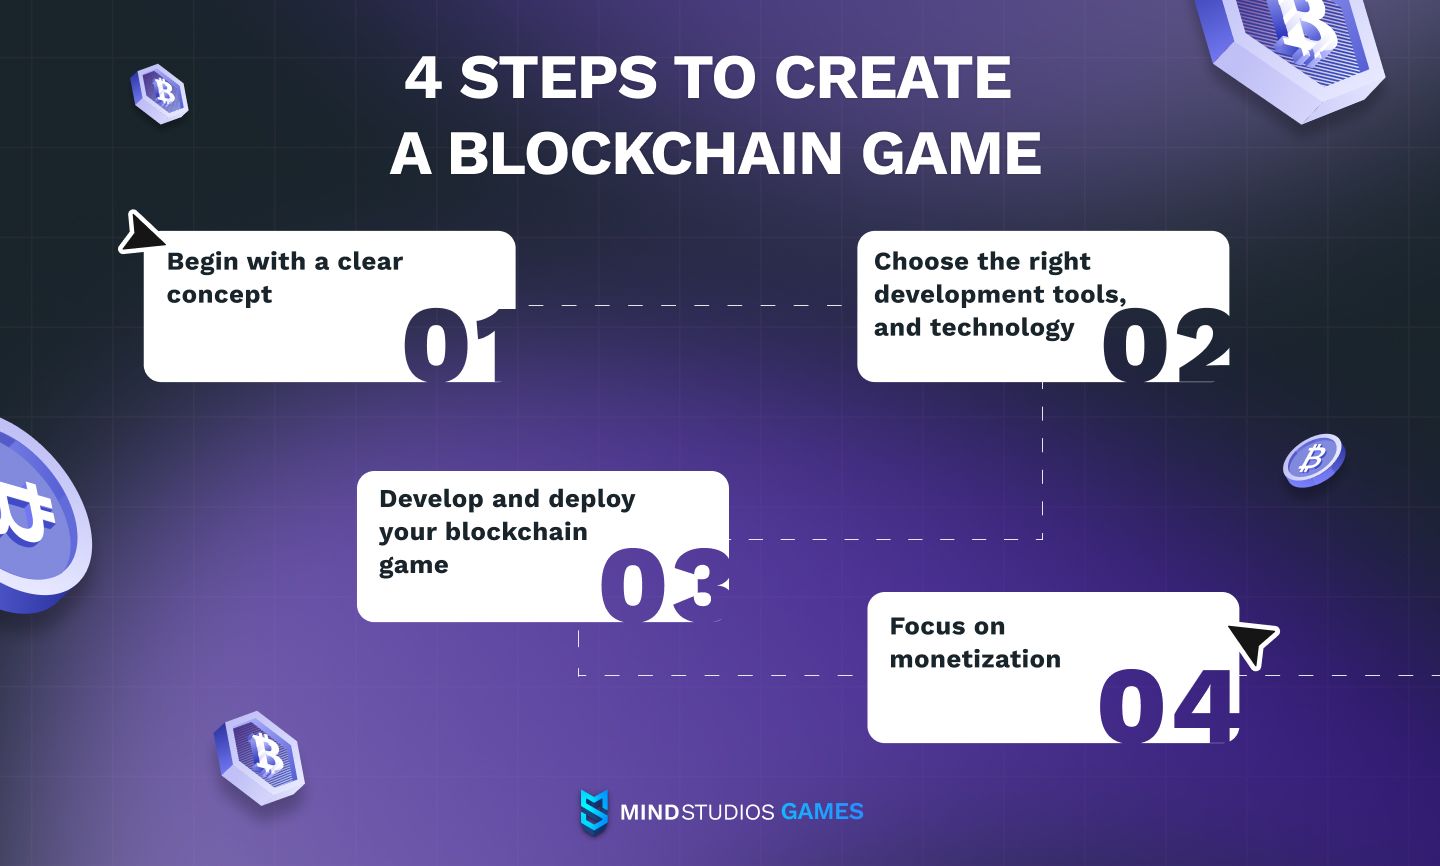 4 steps to create a blockchain game